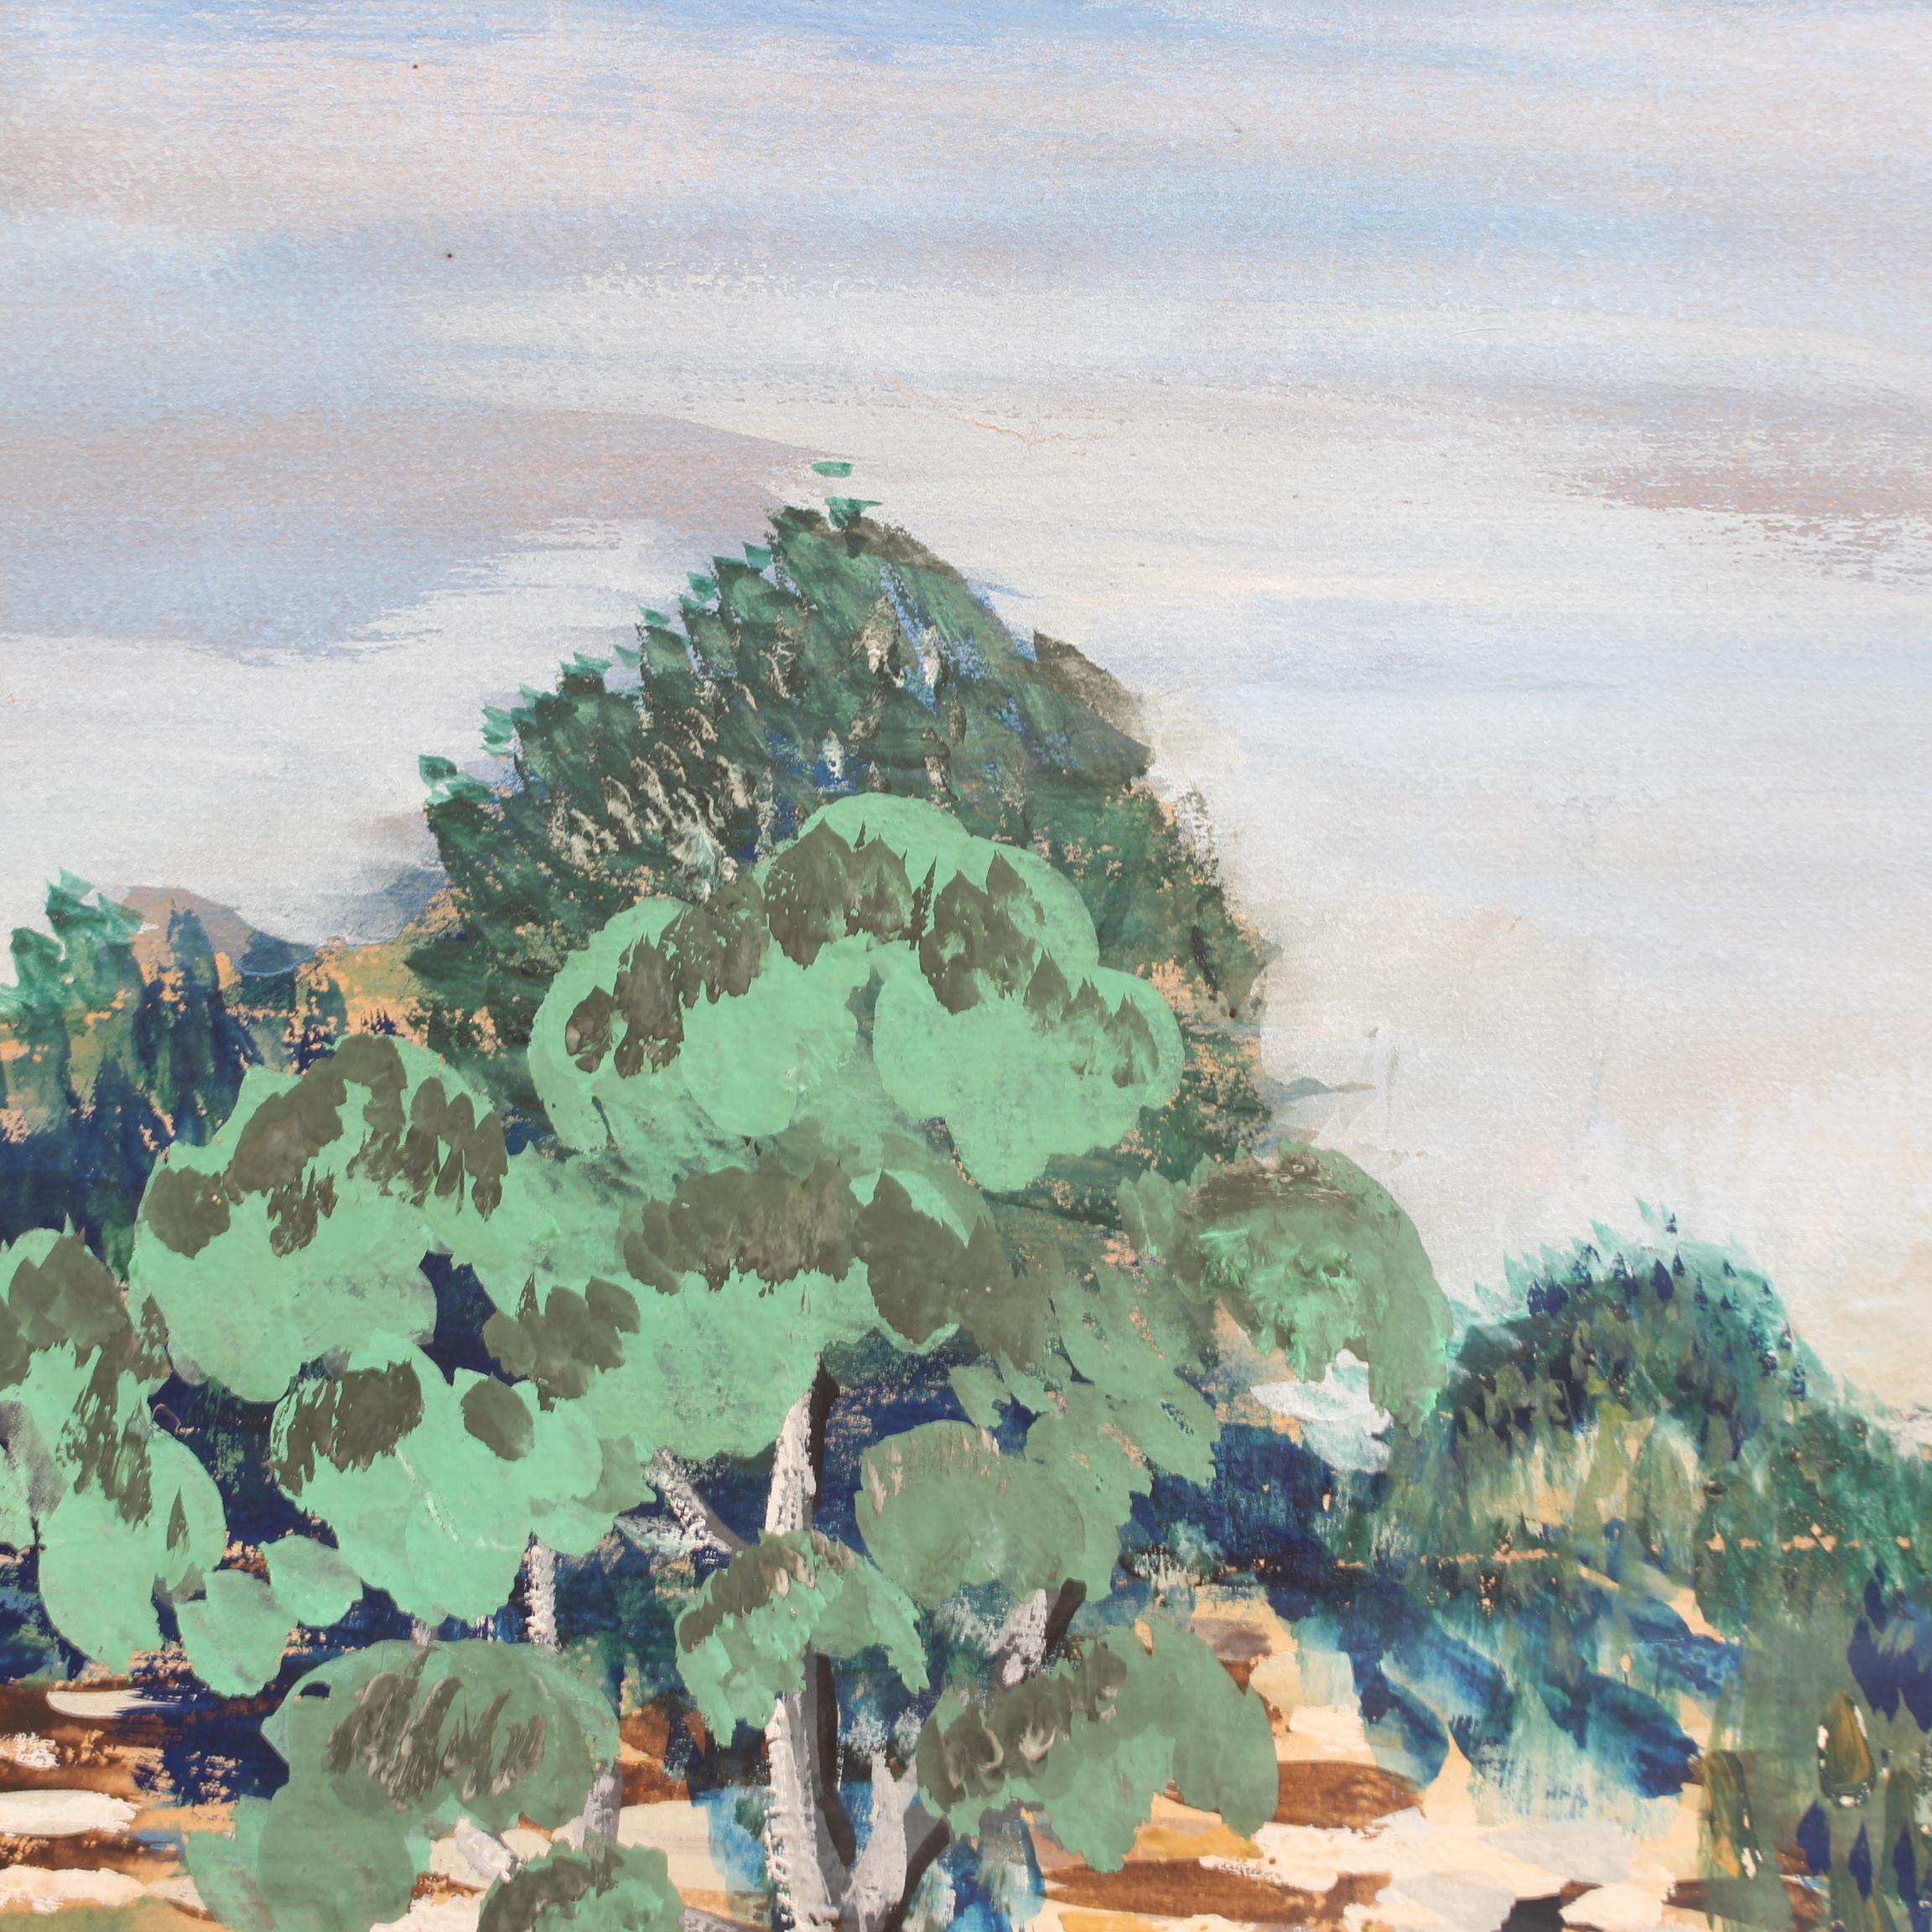 'Parc des Buttes-Chaumont' in Paris, gouache on art paper, by Lucien Génin (circa 1930s). A charming depiction of well turned out Parisians enjoying a day at the park. Boaters, strollers and swans all co-mingle around the peaceful lake. The